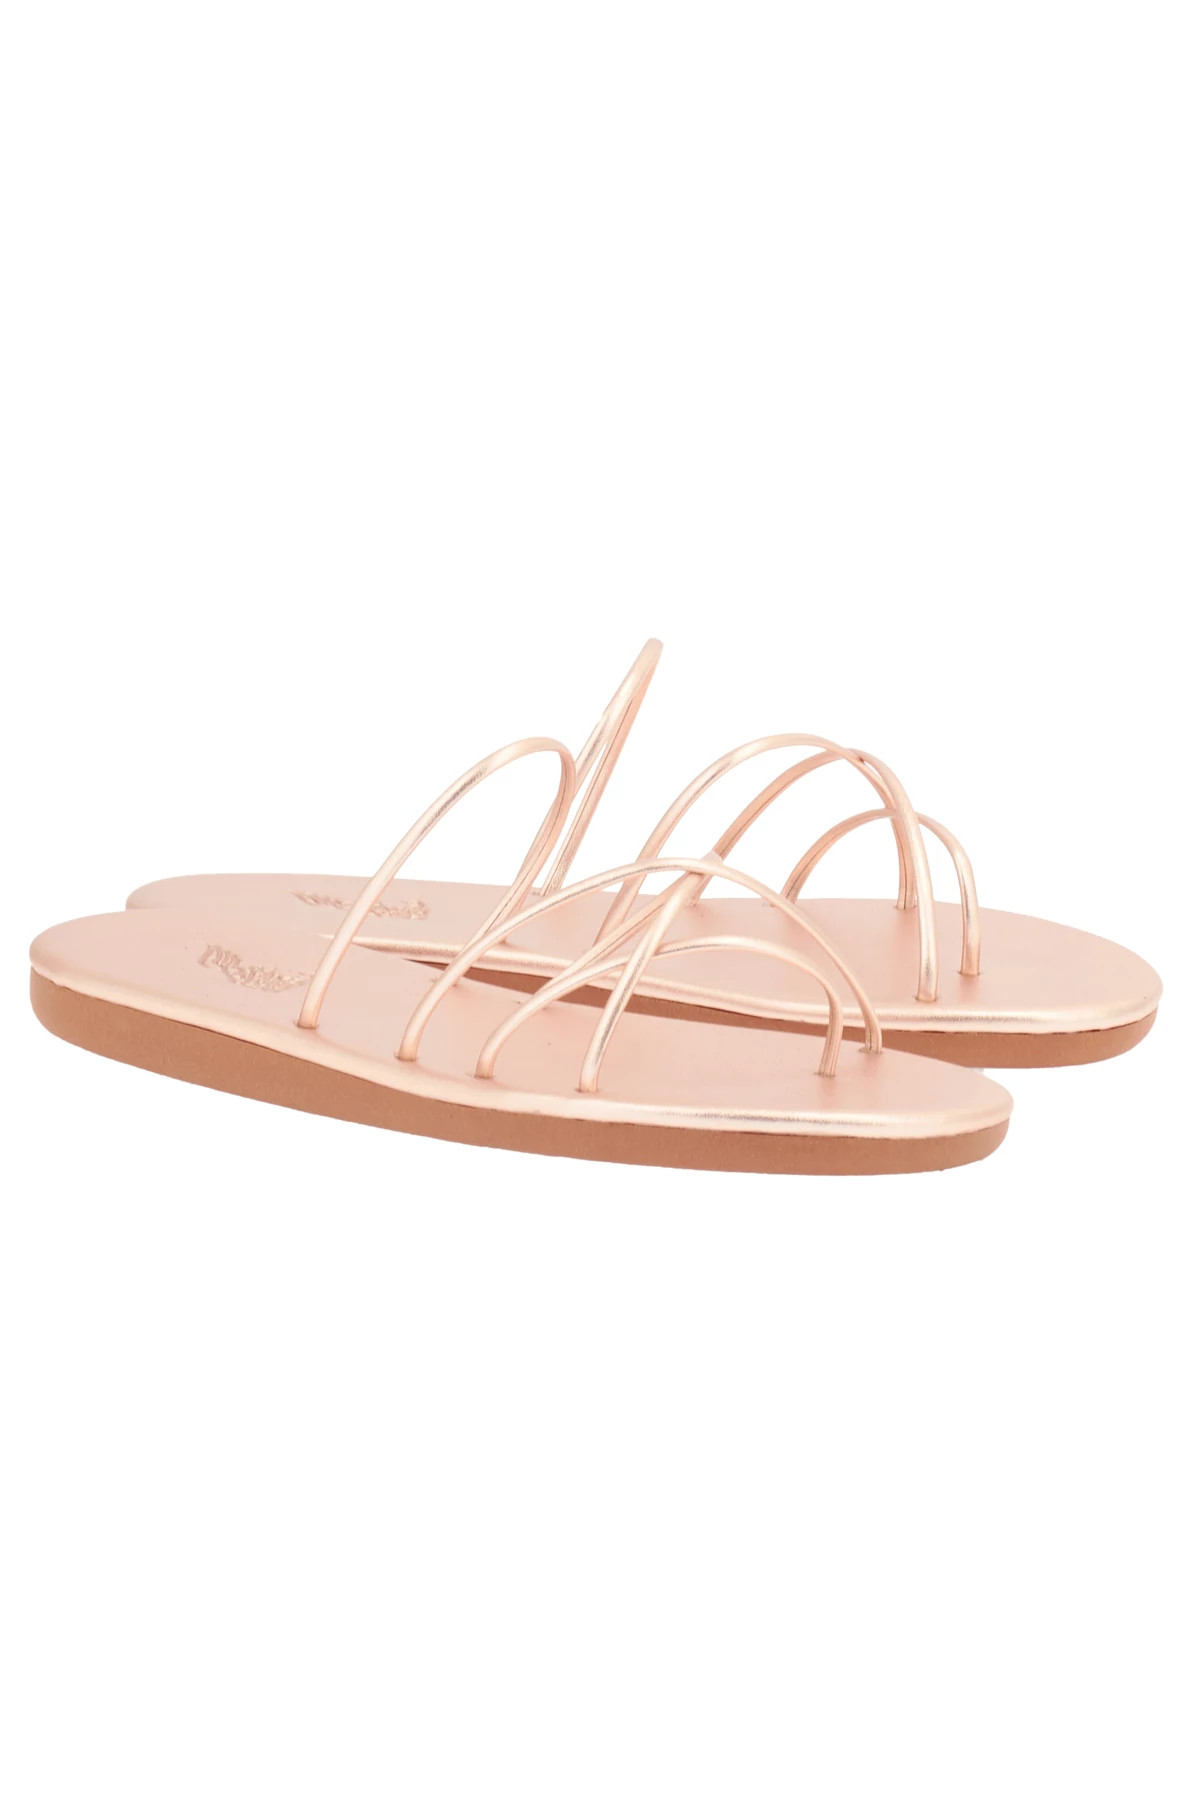 ROSE GOLD Pu Metallic Strappy Sandals image number 2